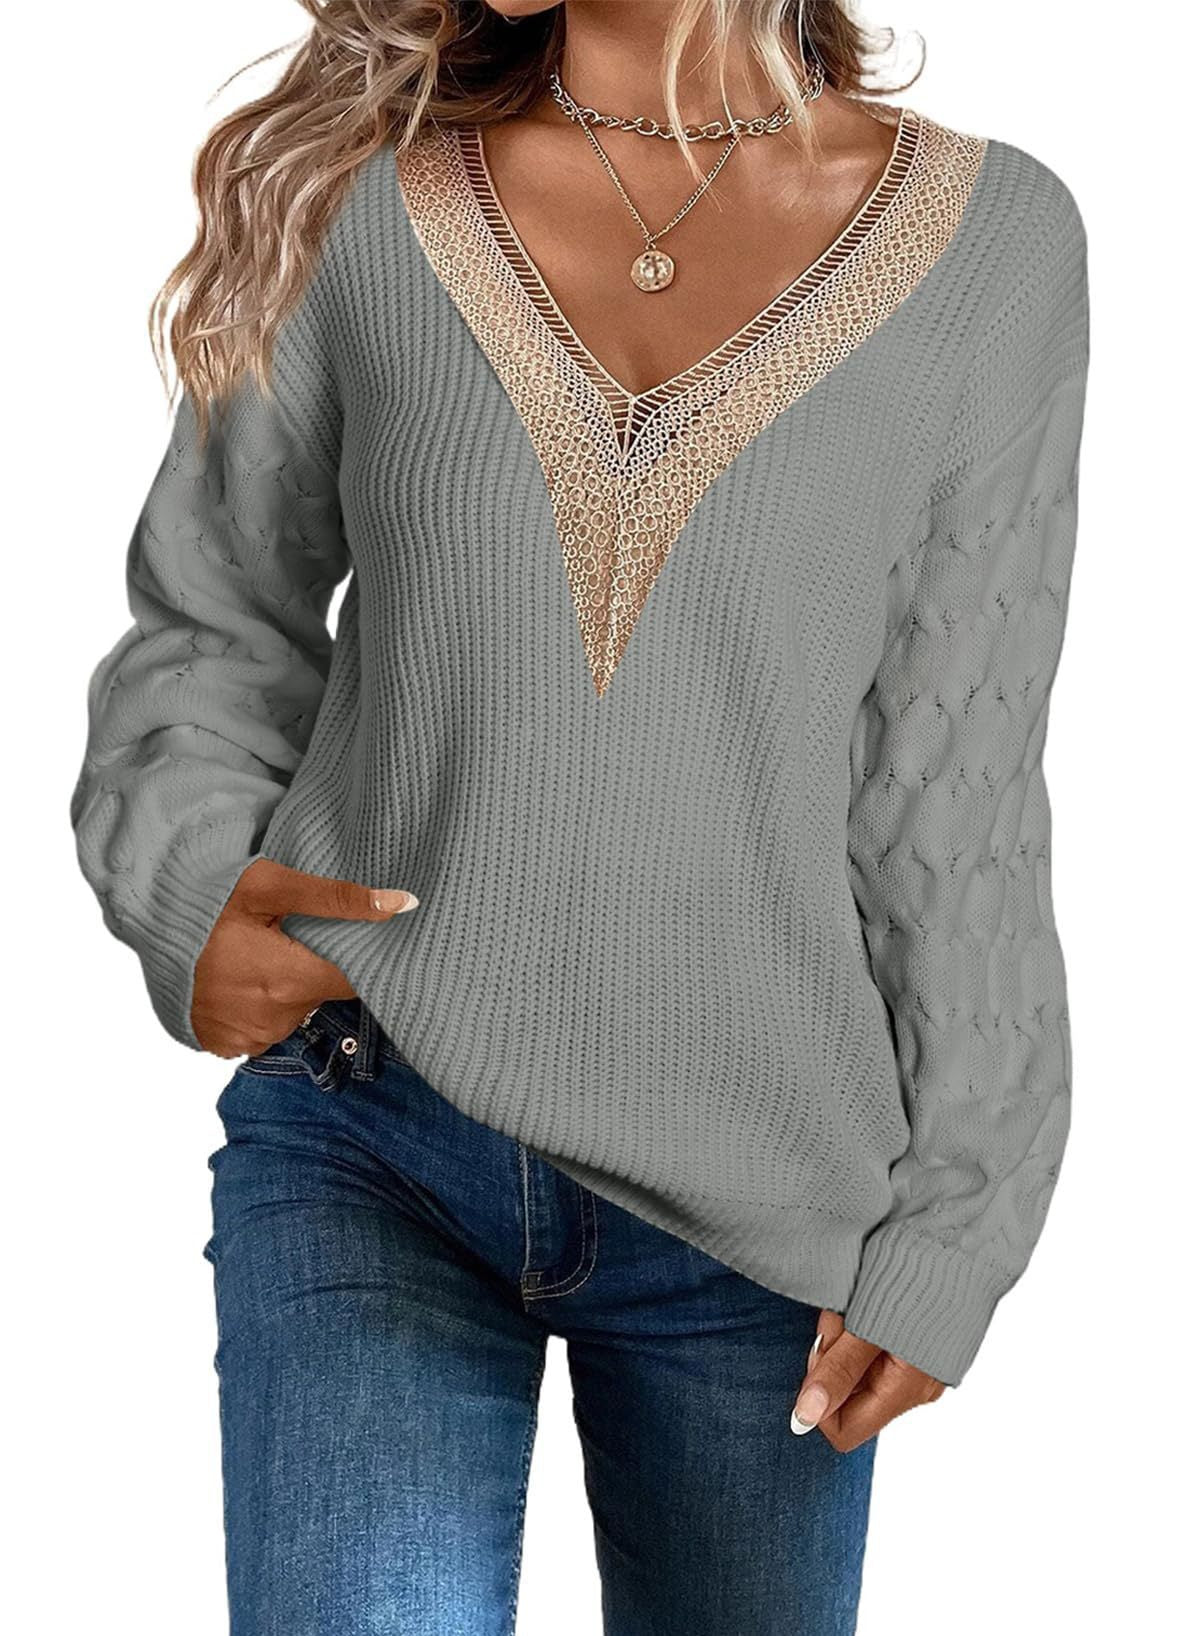 Attractive Fashion Sexy Lace Knitted Pullover Sweaters